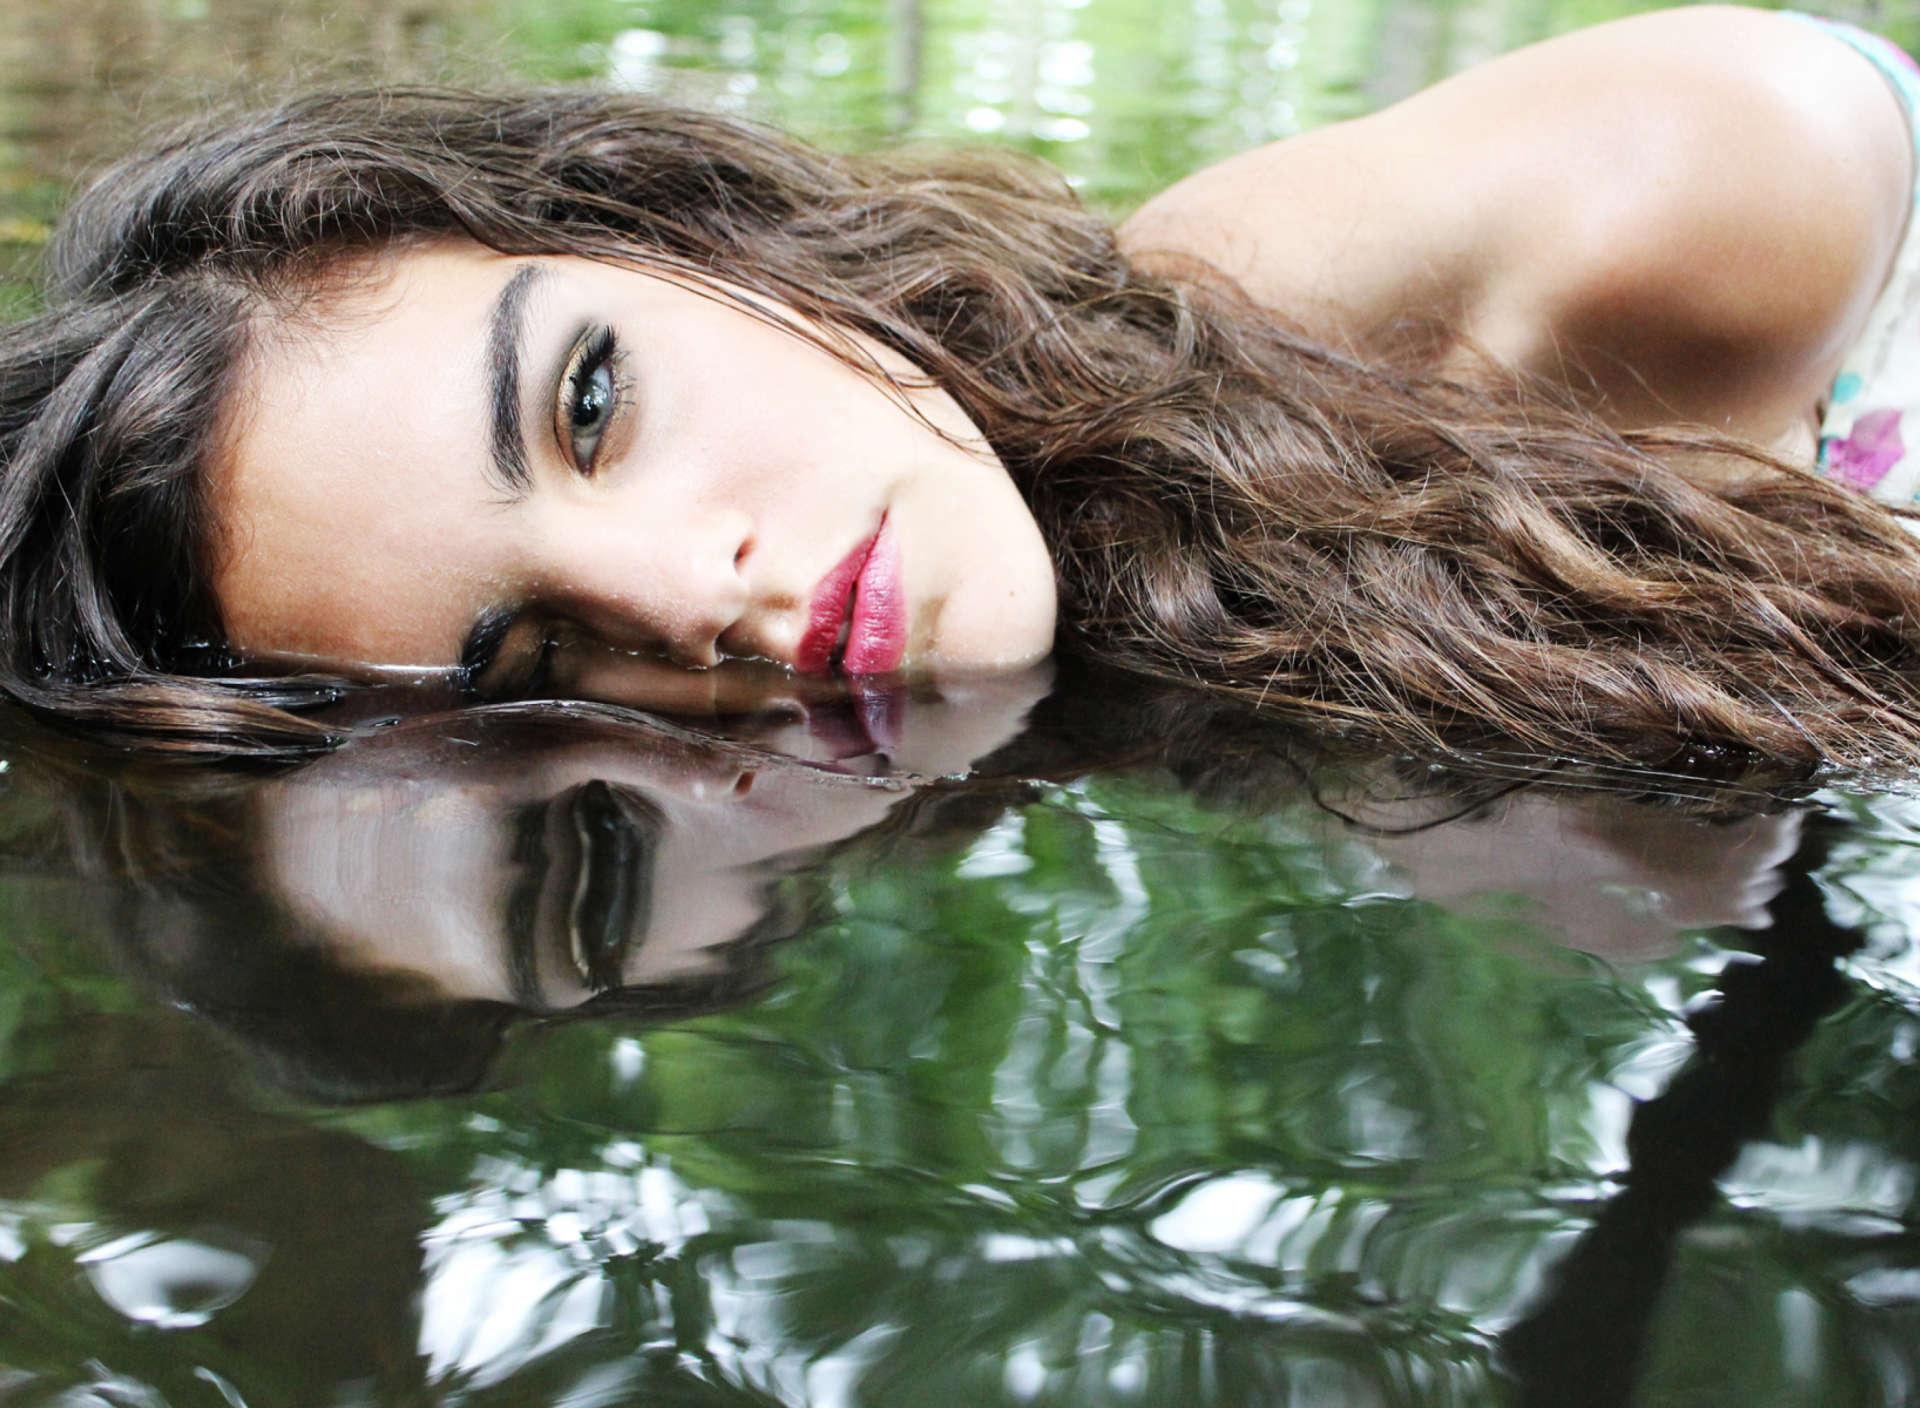 Beautiful Model And Reflection In Water wallpaper 1920x1408